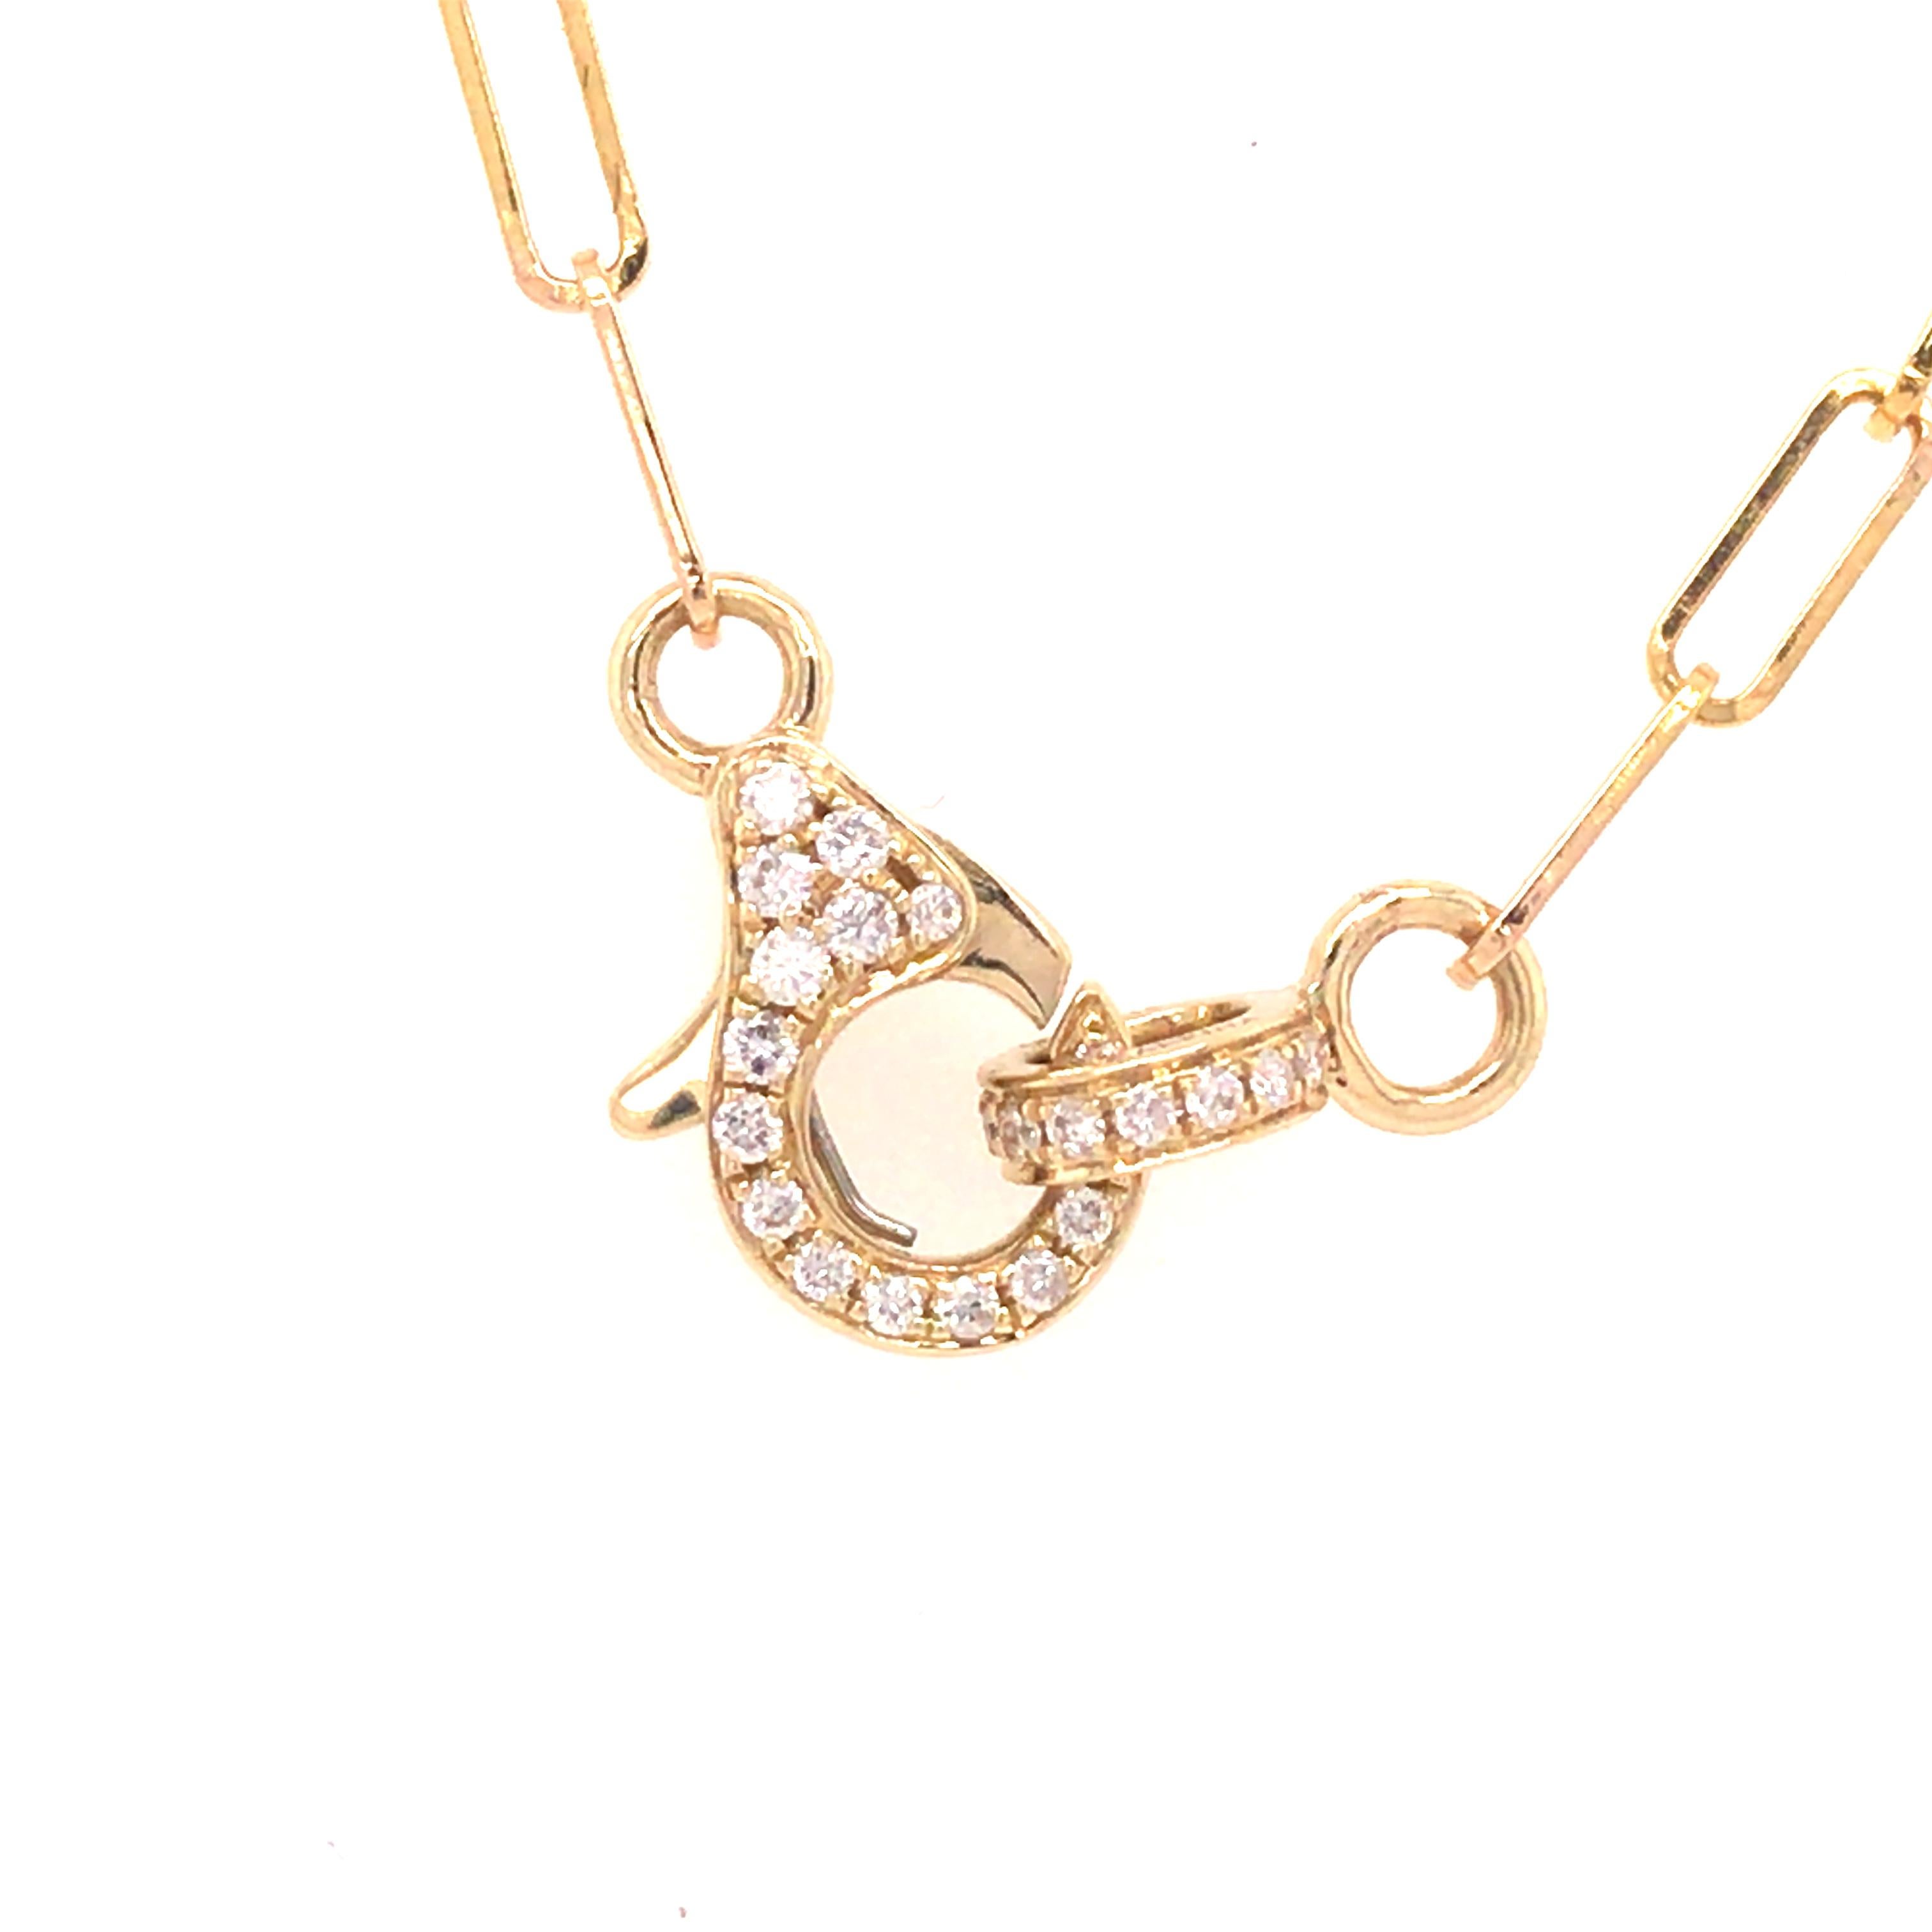 Paperclip Necklace with Pave Diamond Lobster Clasp in 14K Yellow Gold.  (46) Round Brilliant Cut Diamonds weighing .15 carat total weight, G-H in color and VS in clarity are expertly set.  The Necklace measures 16 inch in length.  3.26 grams.